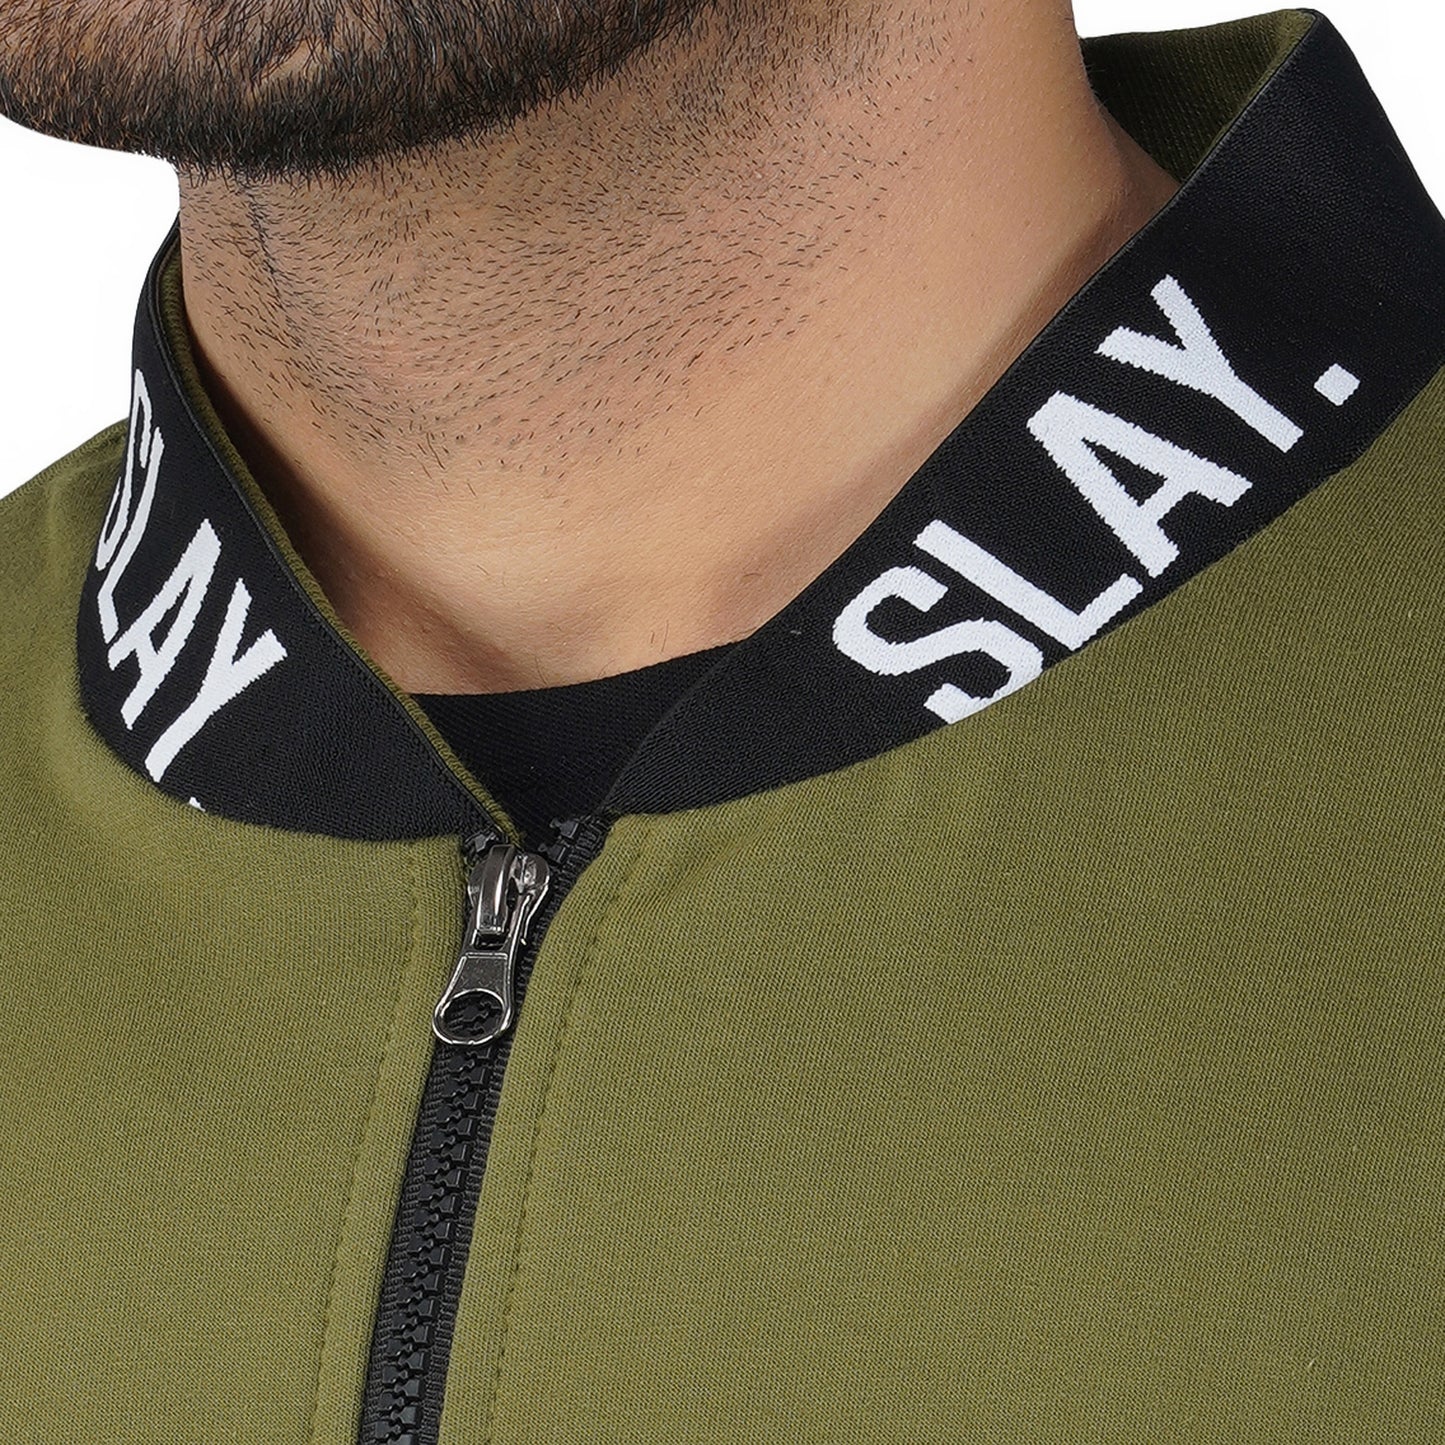 SLAY. Classic Men's Limited Edition Olive Green Tracksuit